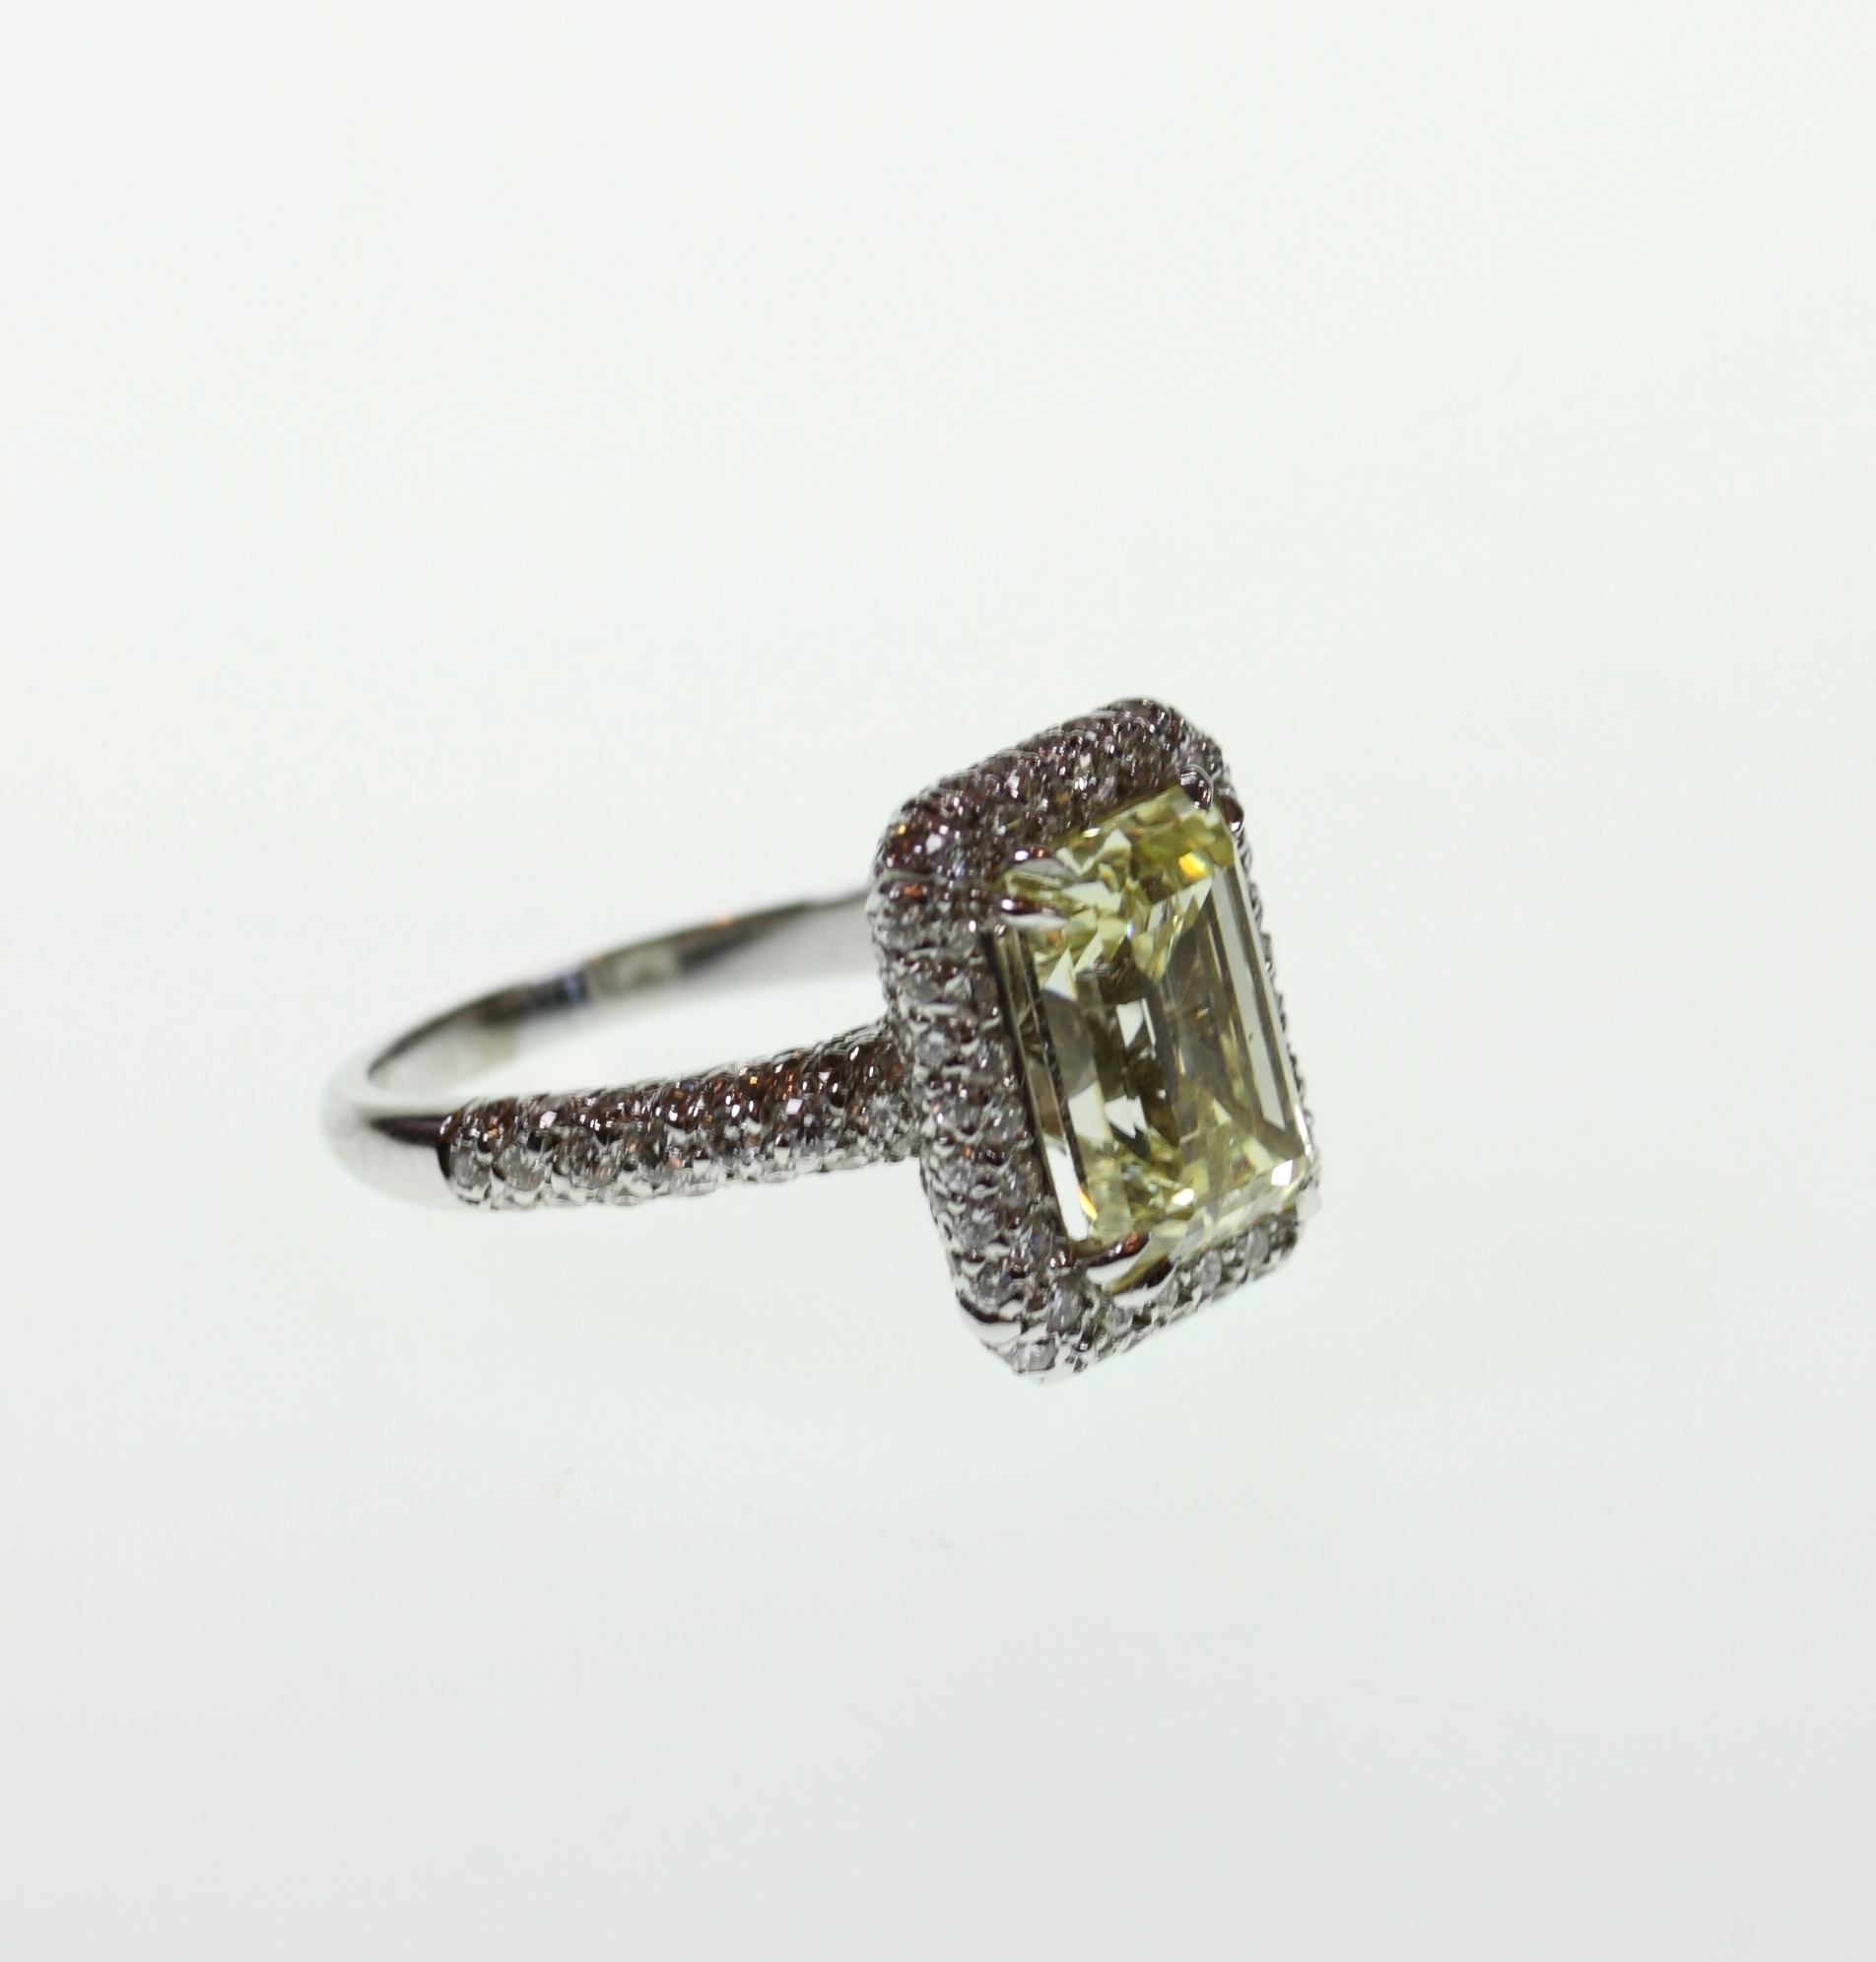 A Natural Fancy Yellow Diamond Dress Ring. 3.75 carats VS2. Size M. With GIA of America certificate. - Image 7 of 8